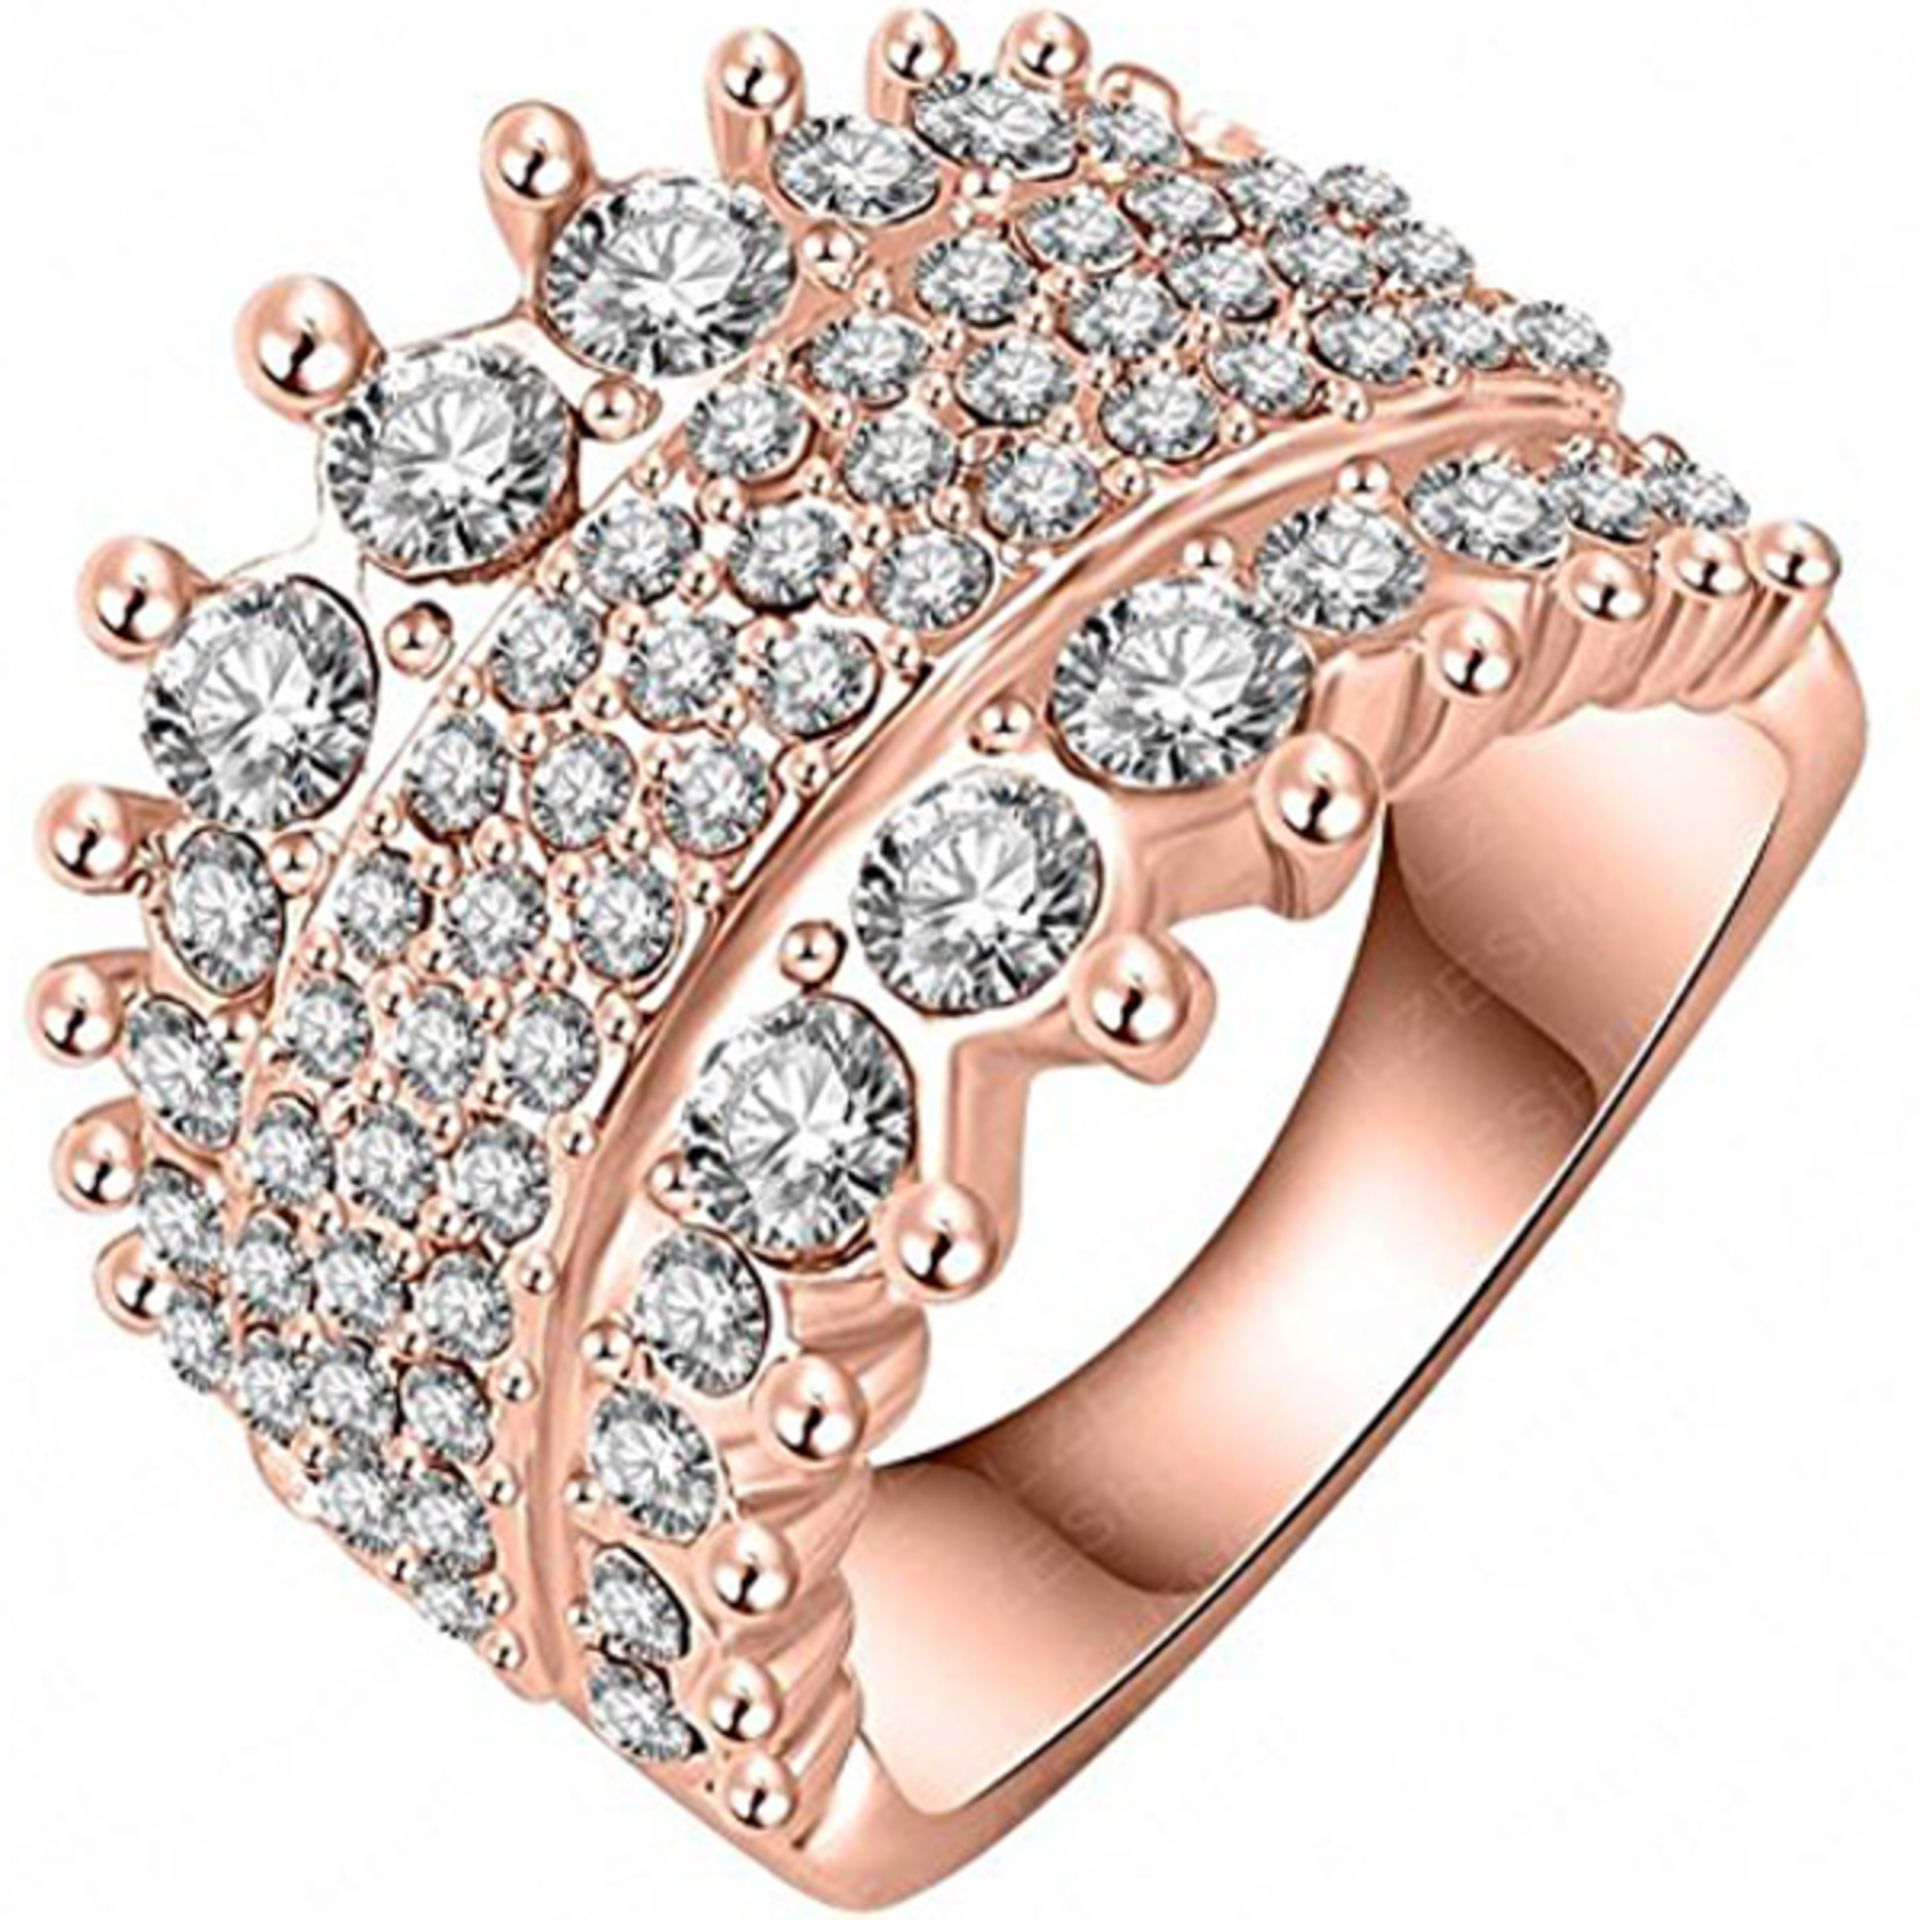 V Brand New Rose Gold Plated Multi Layer Style Austrian Crystal Ring X 2 YOUR BID PRICE TO BE